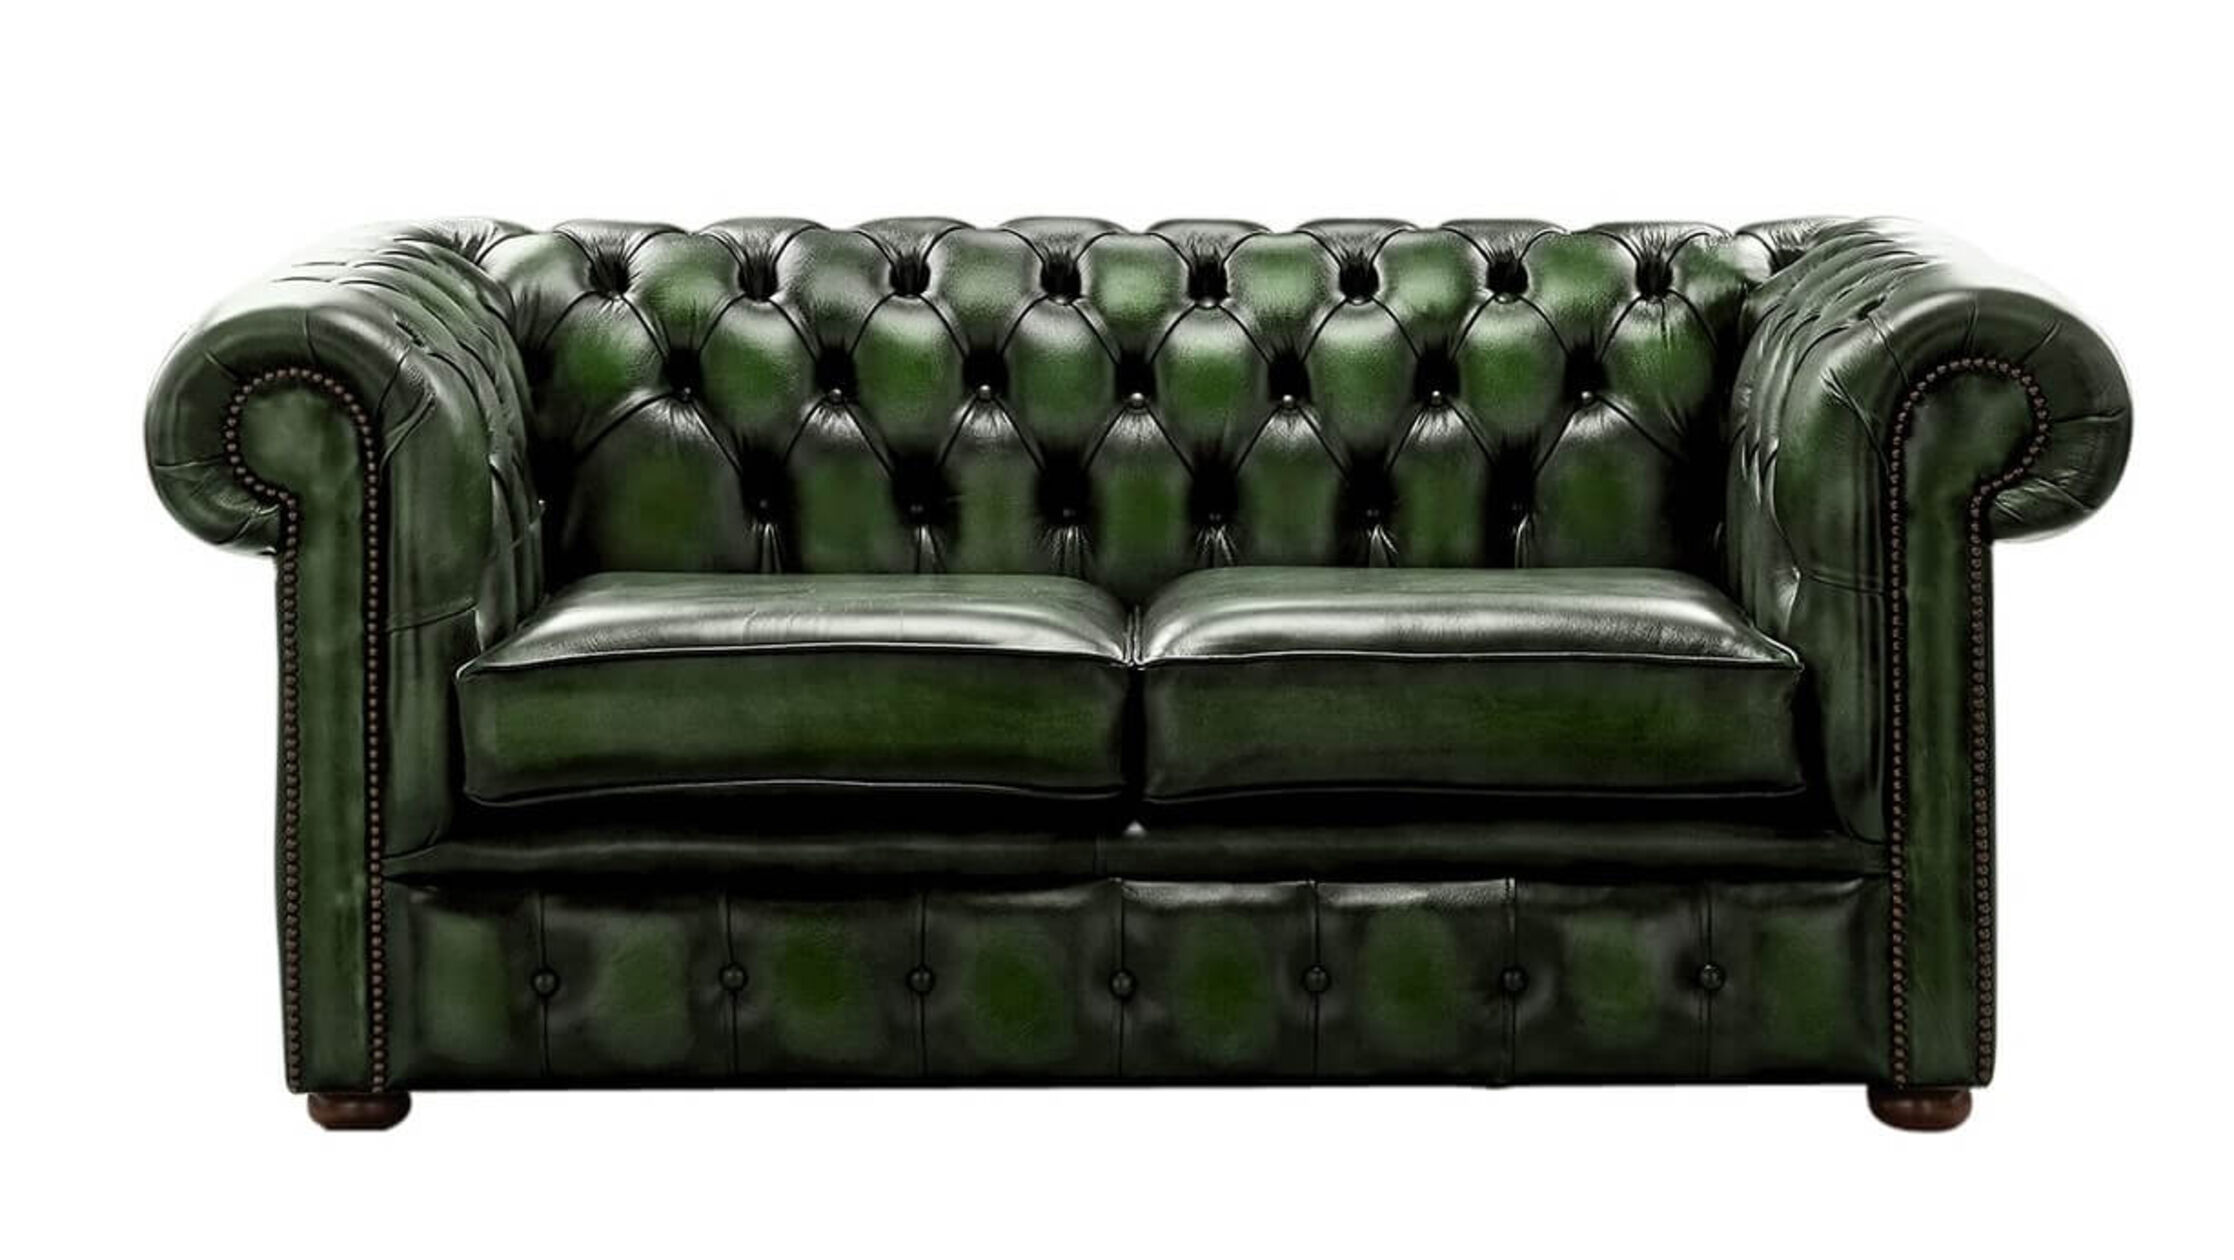 Chesterfield 2 Seater Sofa Settee, Money Green Leather Sofa